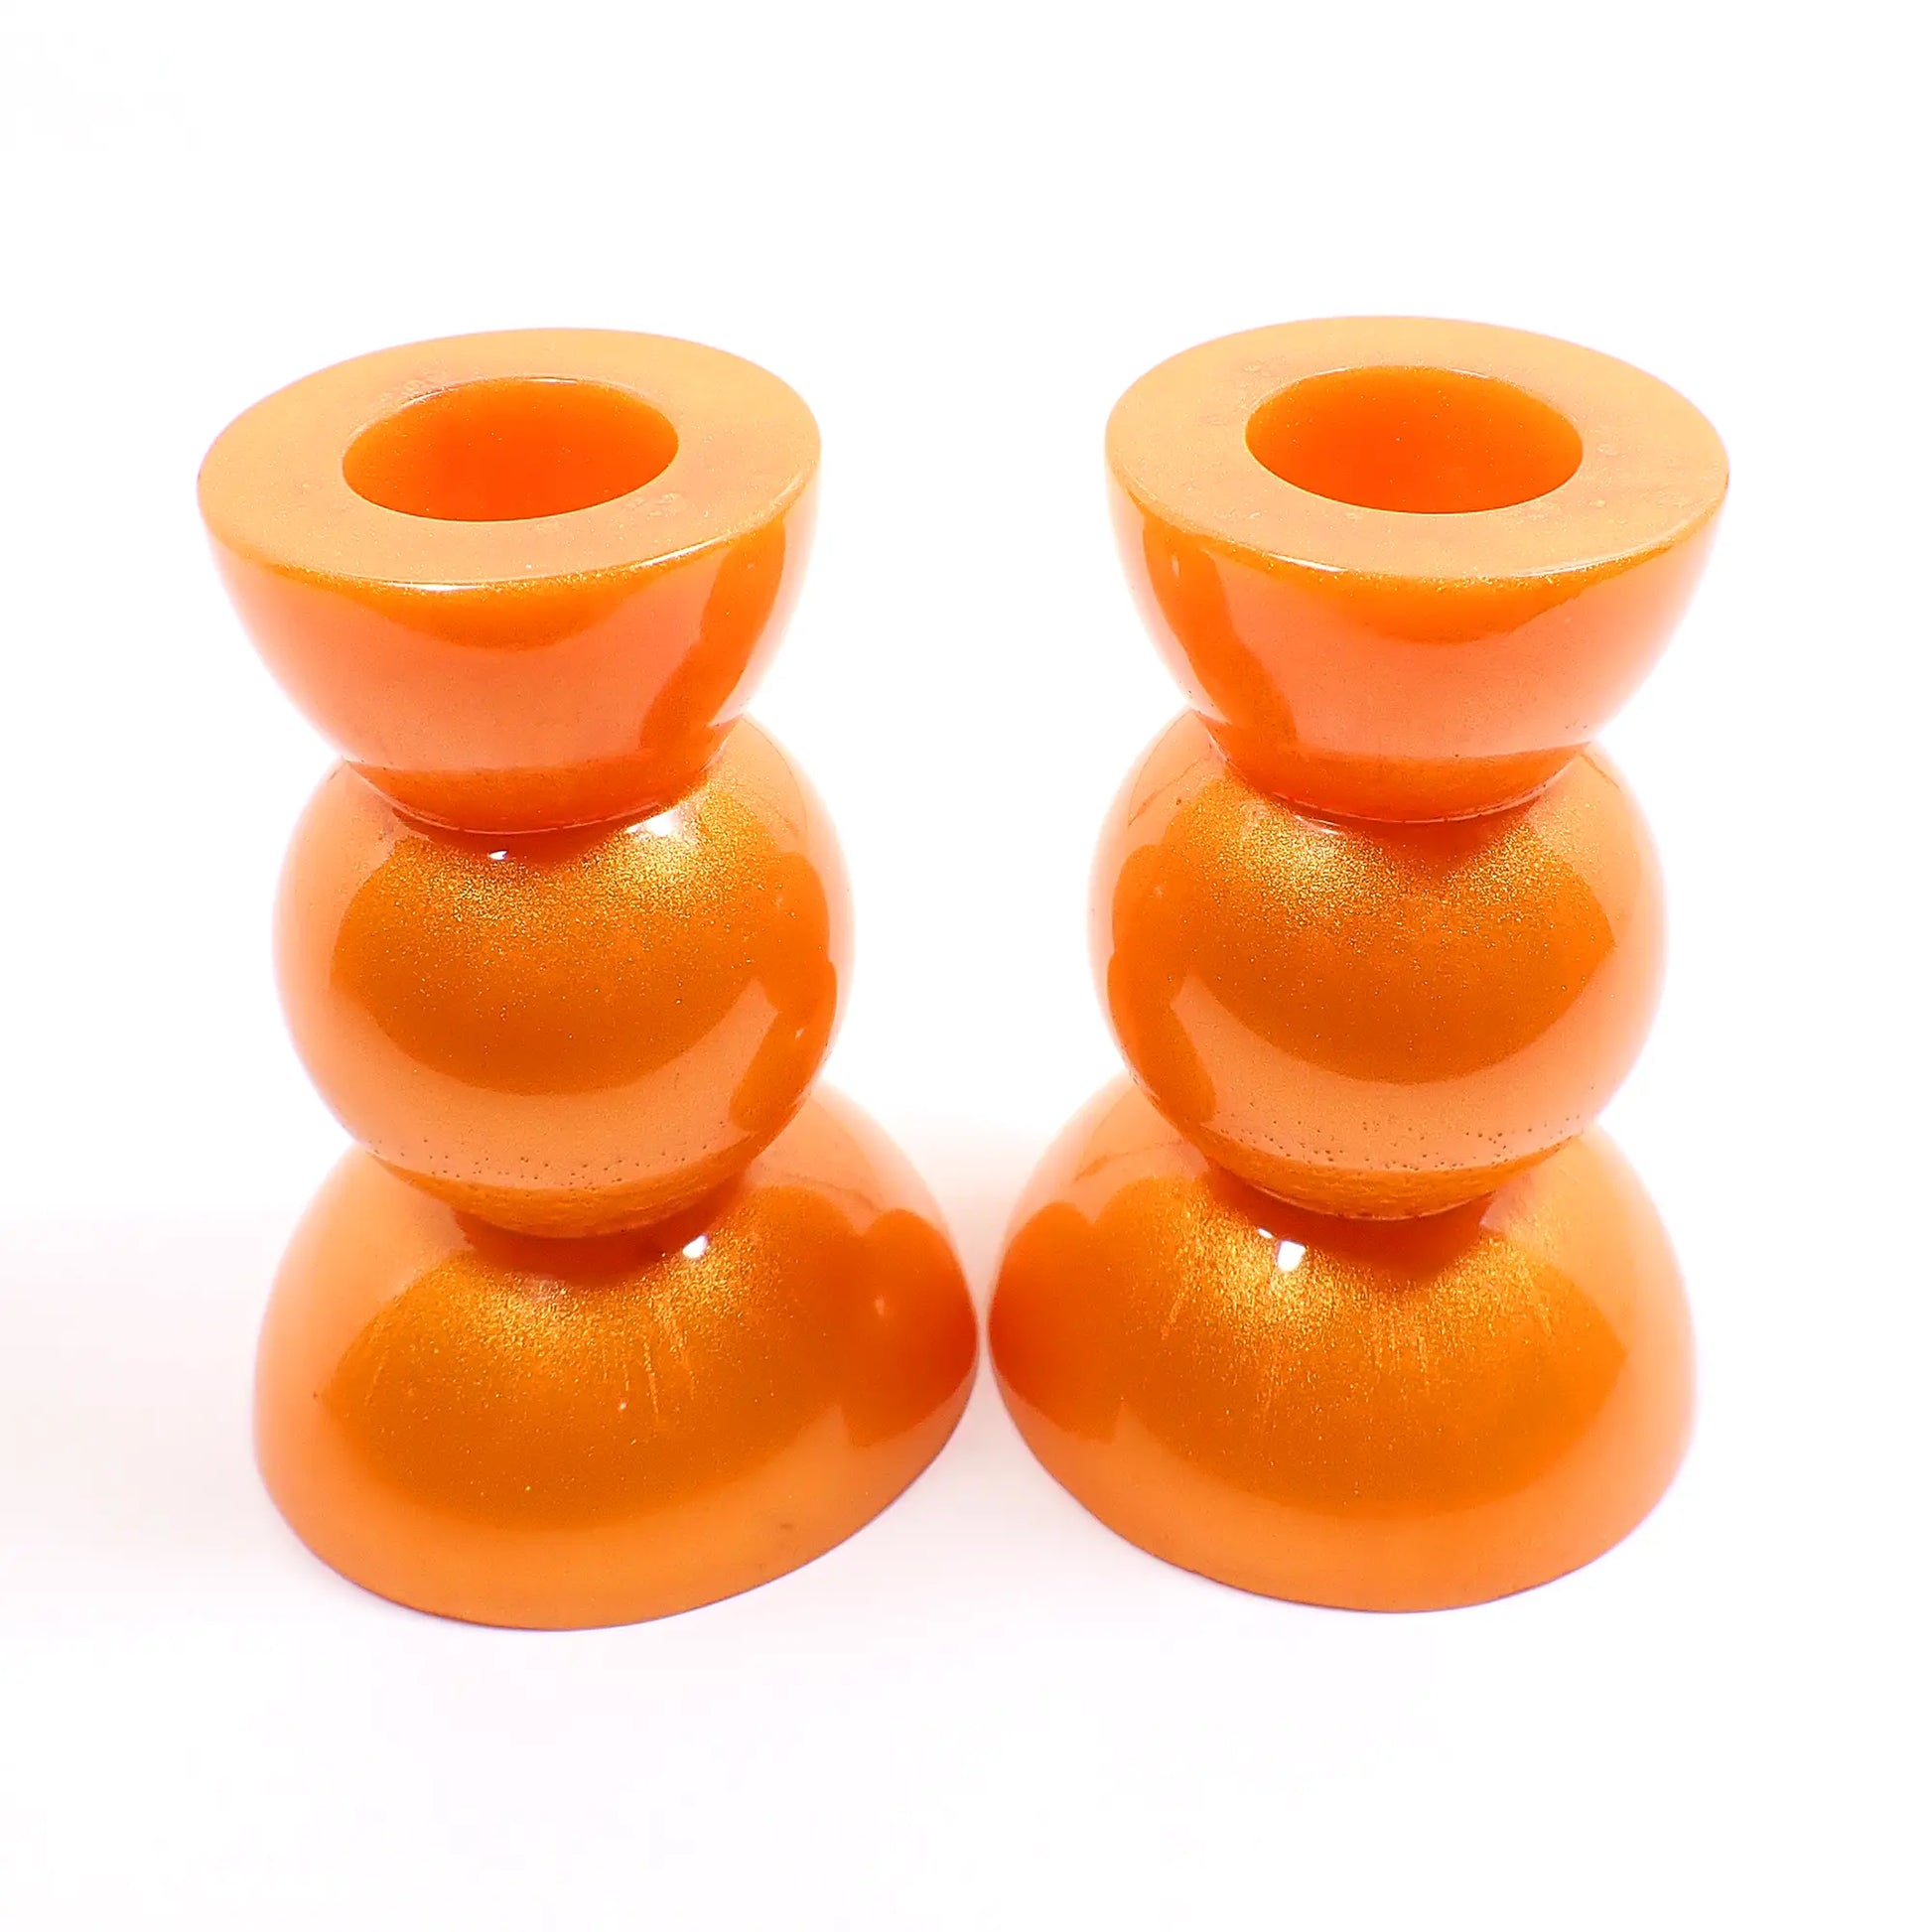 Side view of the handmade geometric candlestick holders. They have a round ball area in the middle and a semi sphere shape on the top and bottom. The resin is a bright citrus orange color with hints of metallic gold.